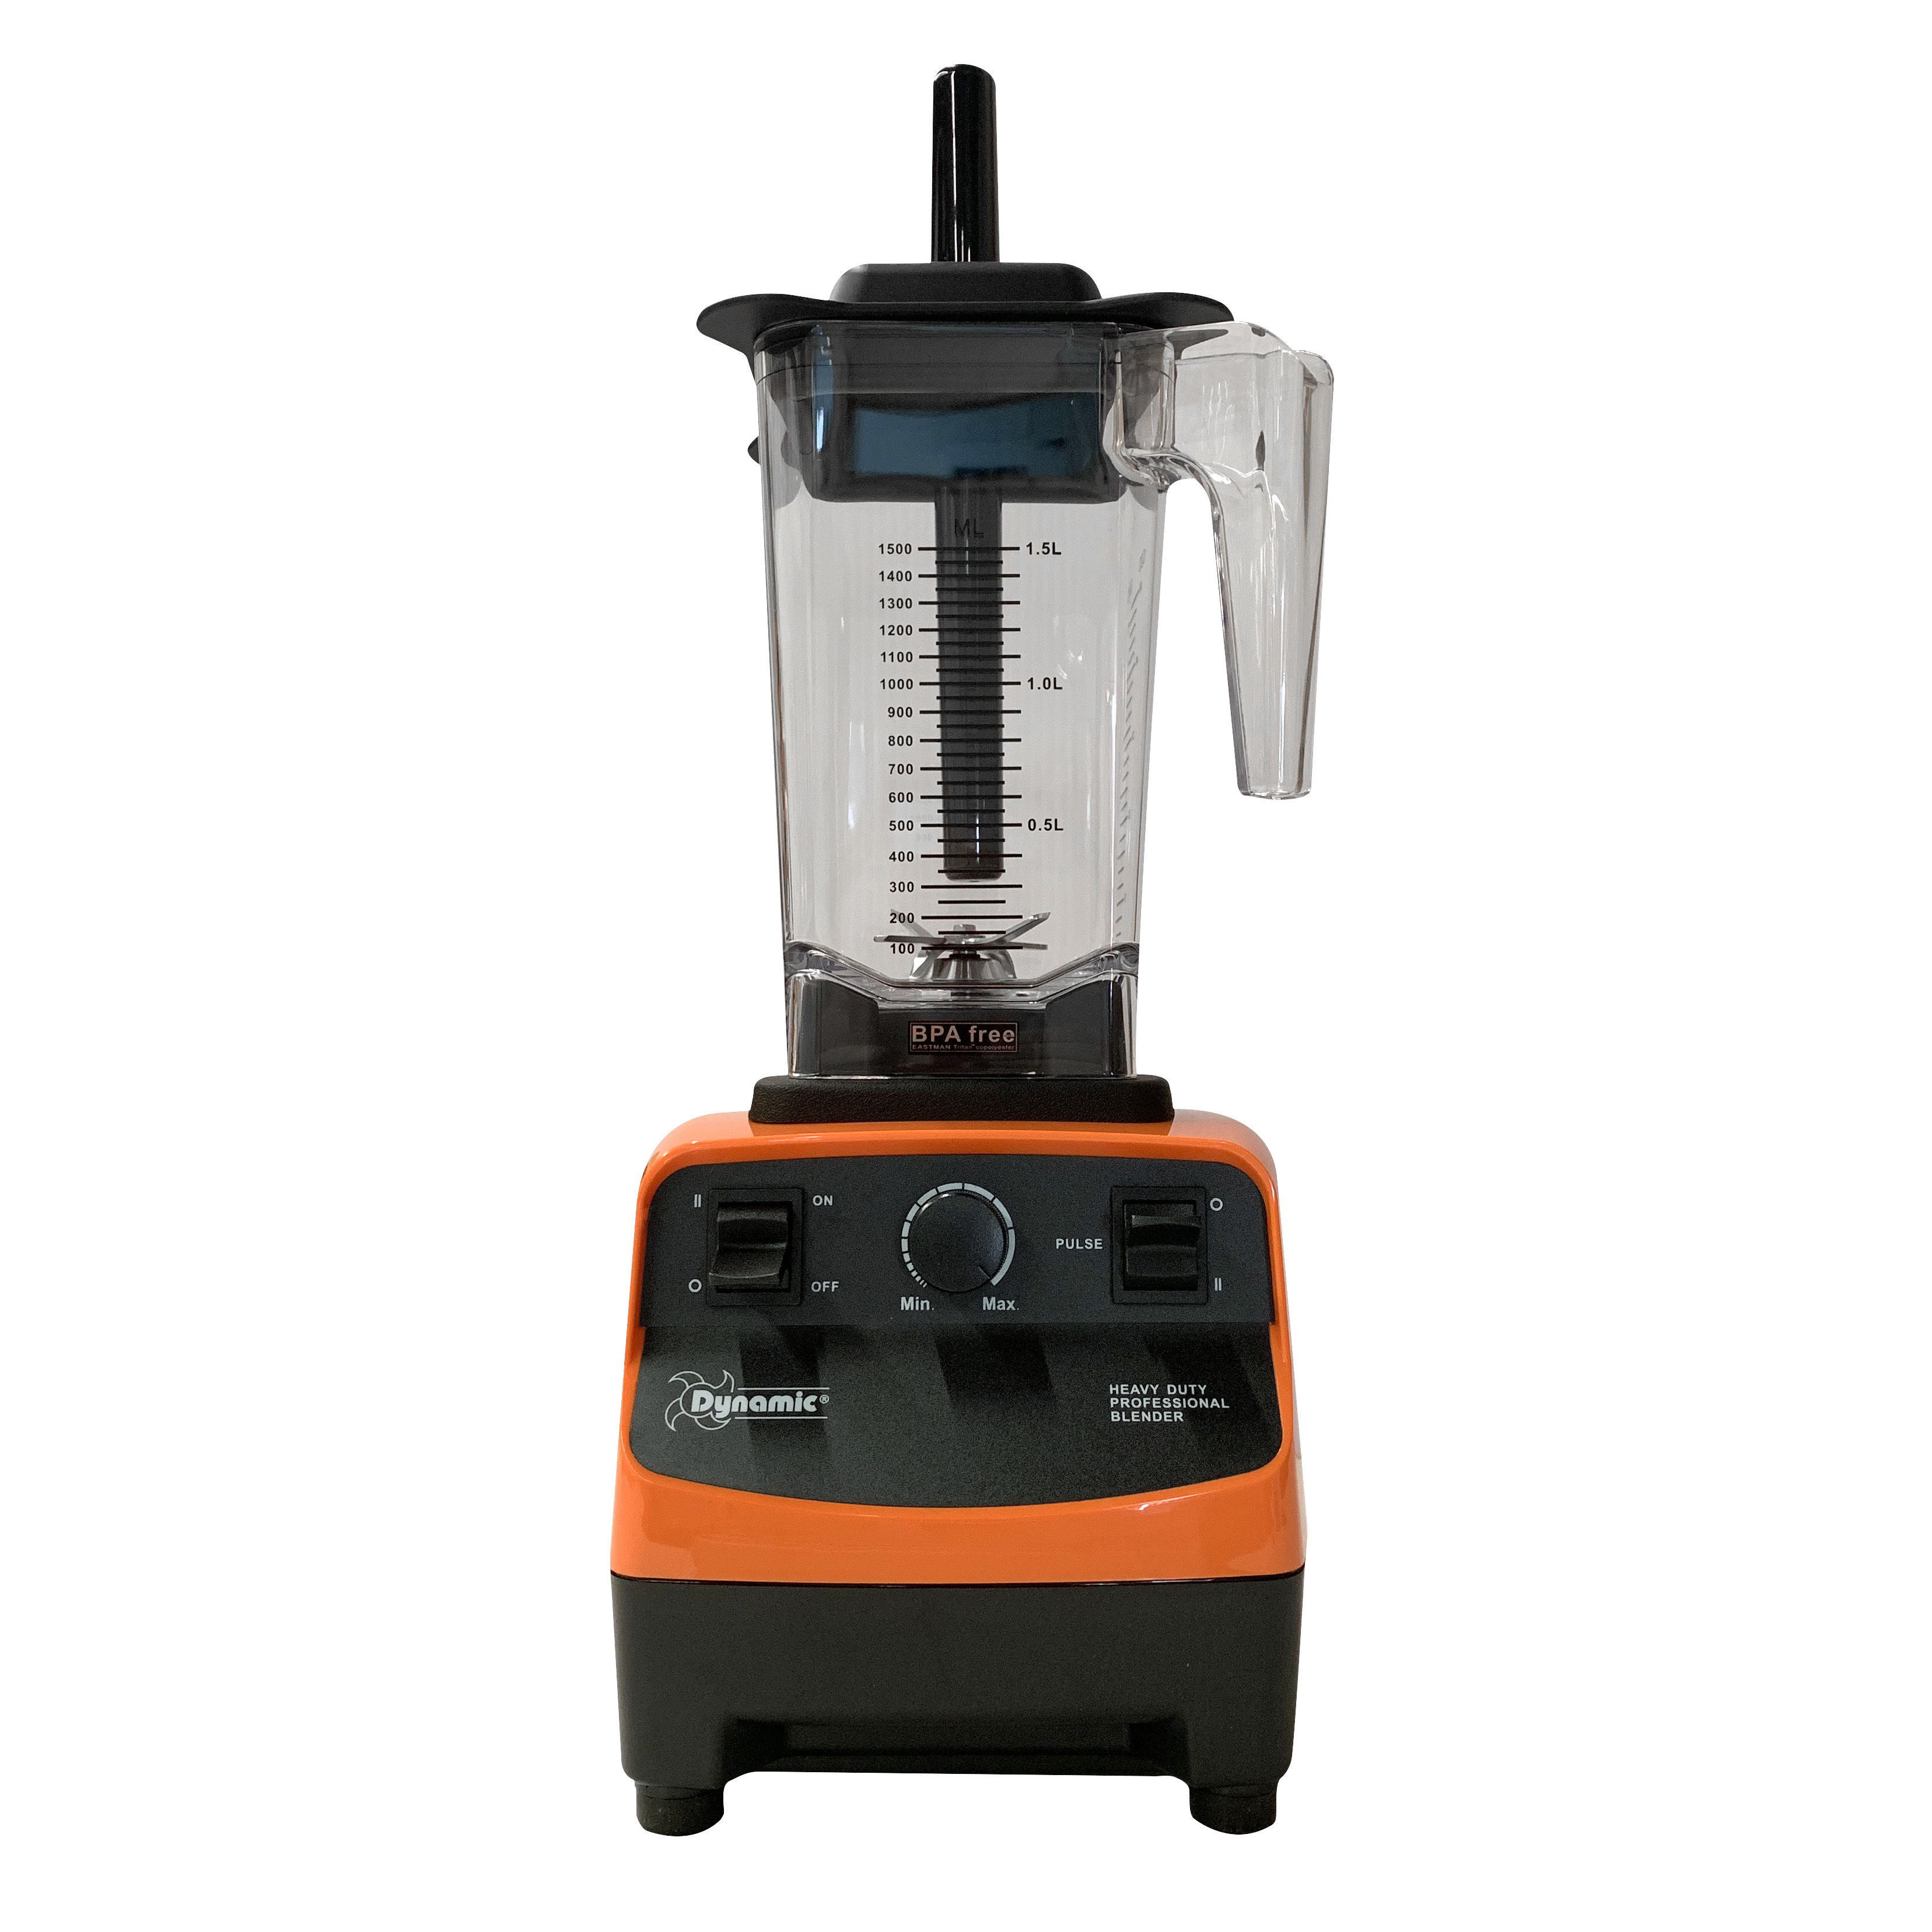 BlendPro 1 Performance 
Blender, 1.5 liter (50 oz.), 
high speed motor, variable 
speed control, pulse option, 
wet &amp; dry application, 2-in-1 
stainless steel cutting blade, 
BPA Free, 38000 RPM, 3 HP, 
1050 watts, 115v/60/1-ph, NEMA 
5-15P, 7/20